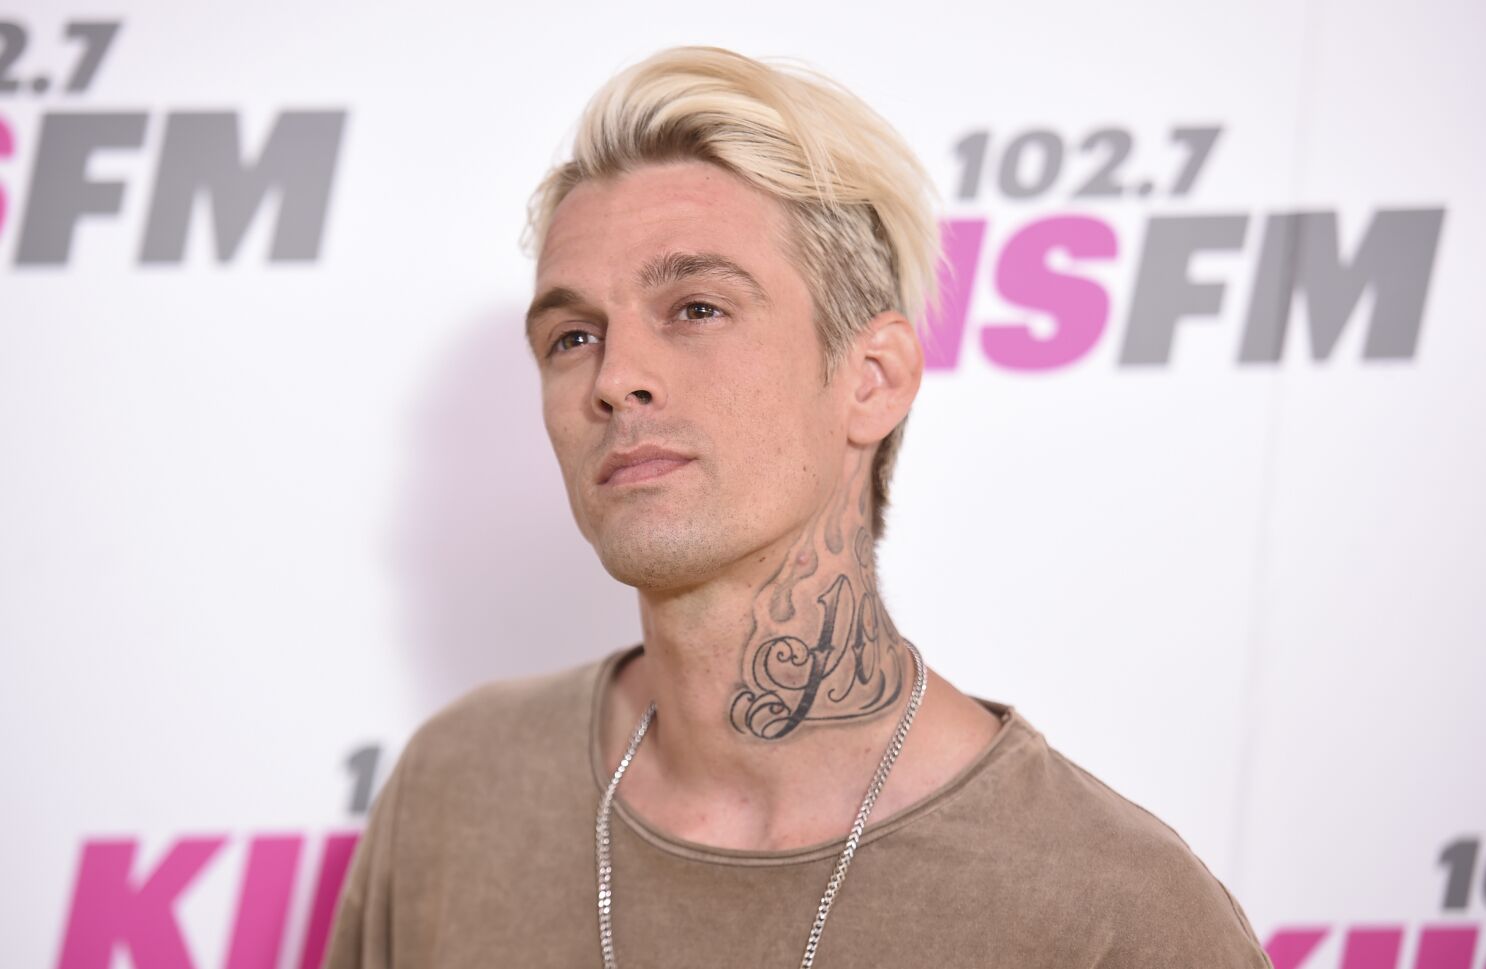 Aaron Carter faced 'relentless' cyberbullying, manager says - Los Angeles  Times